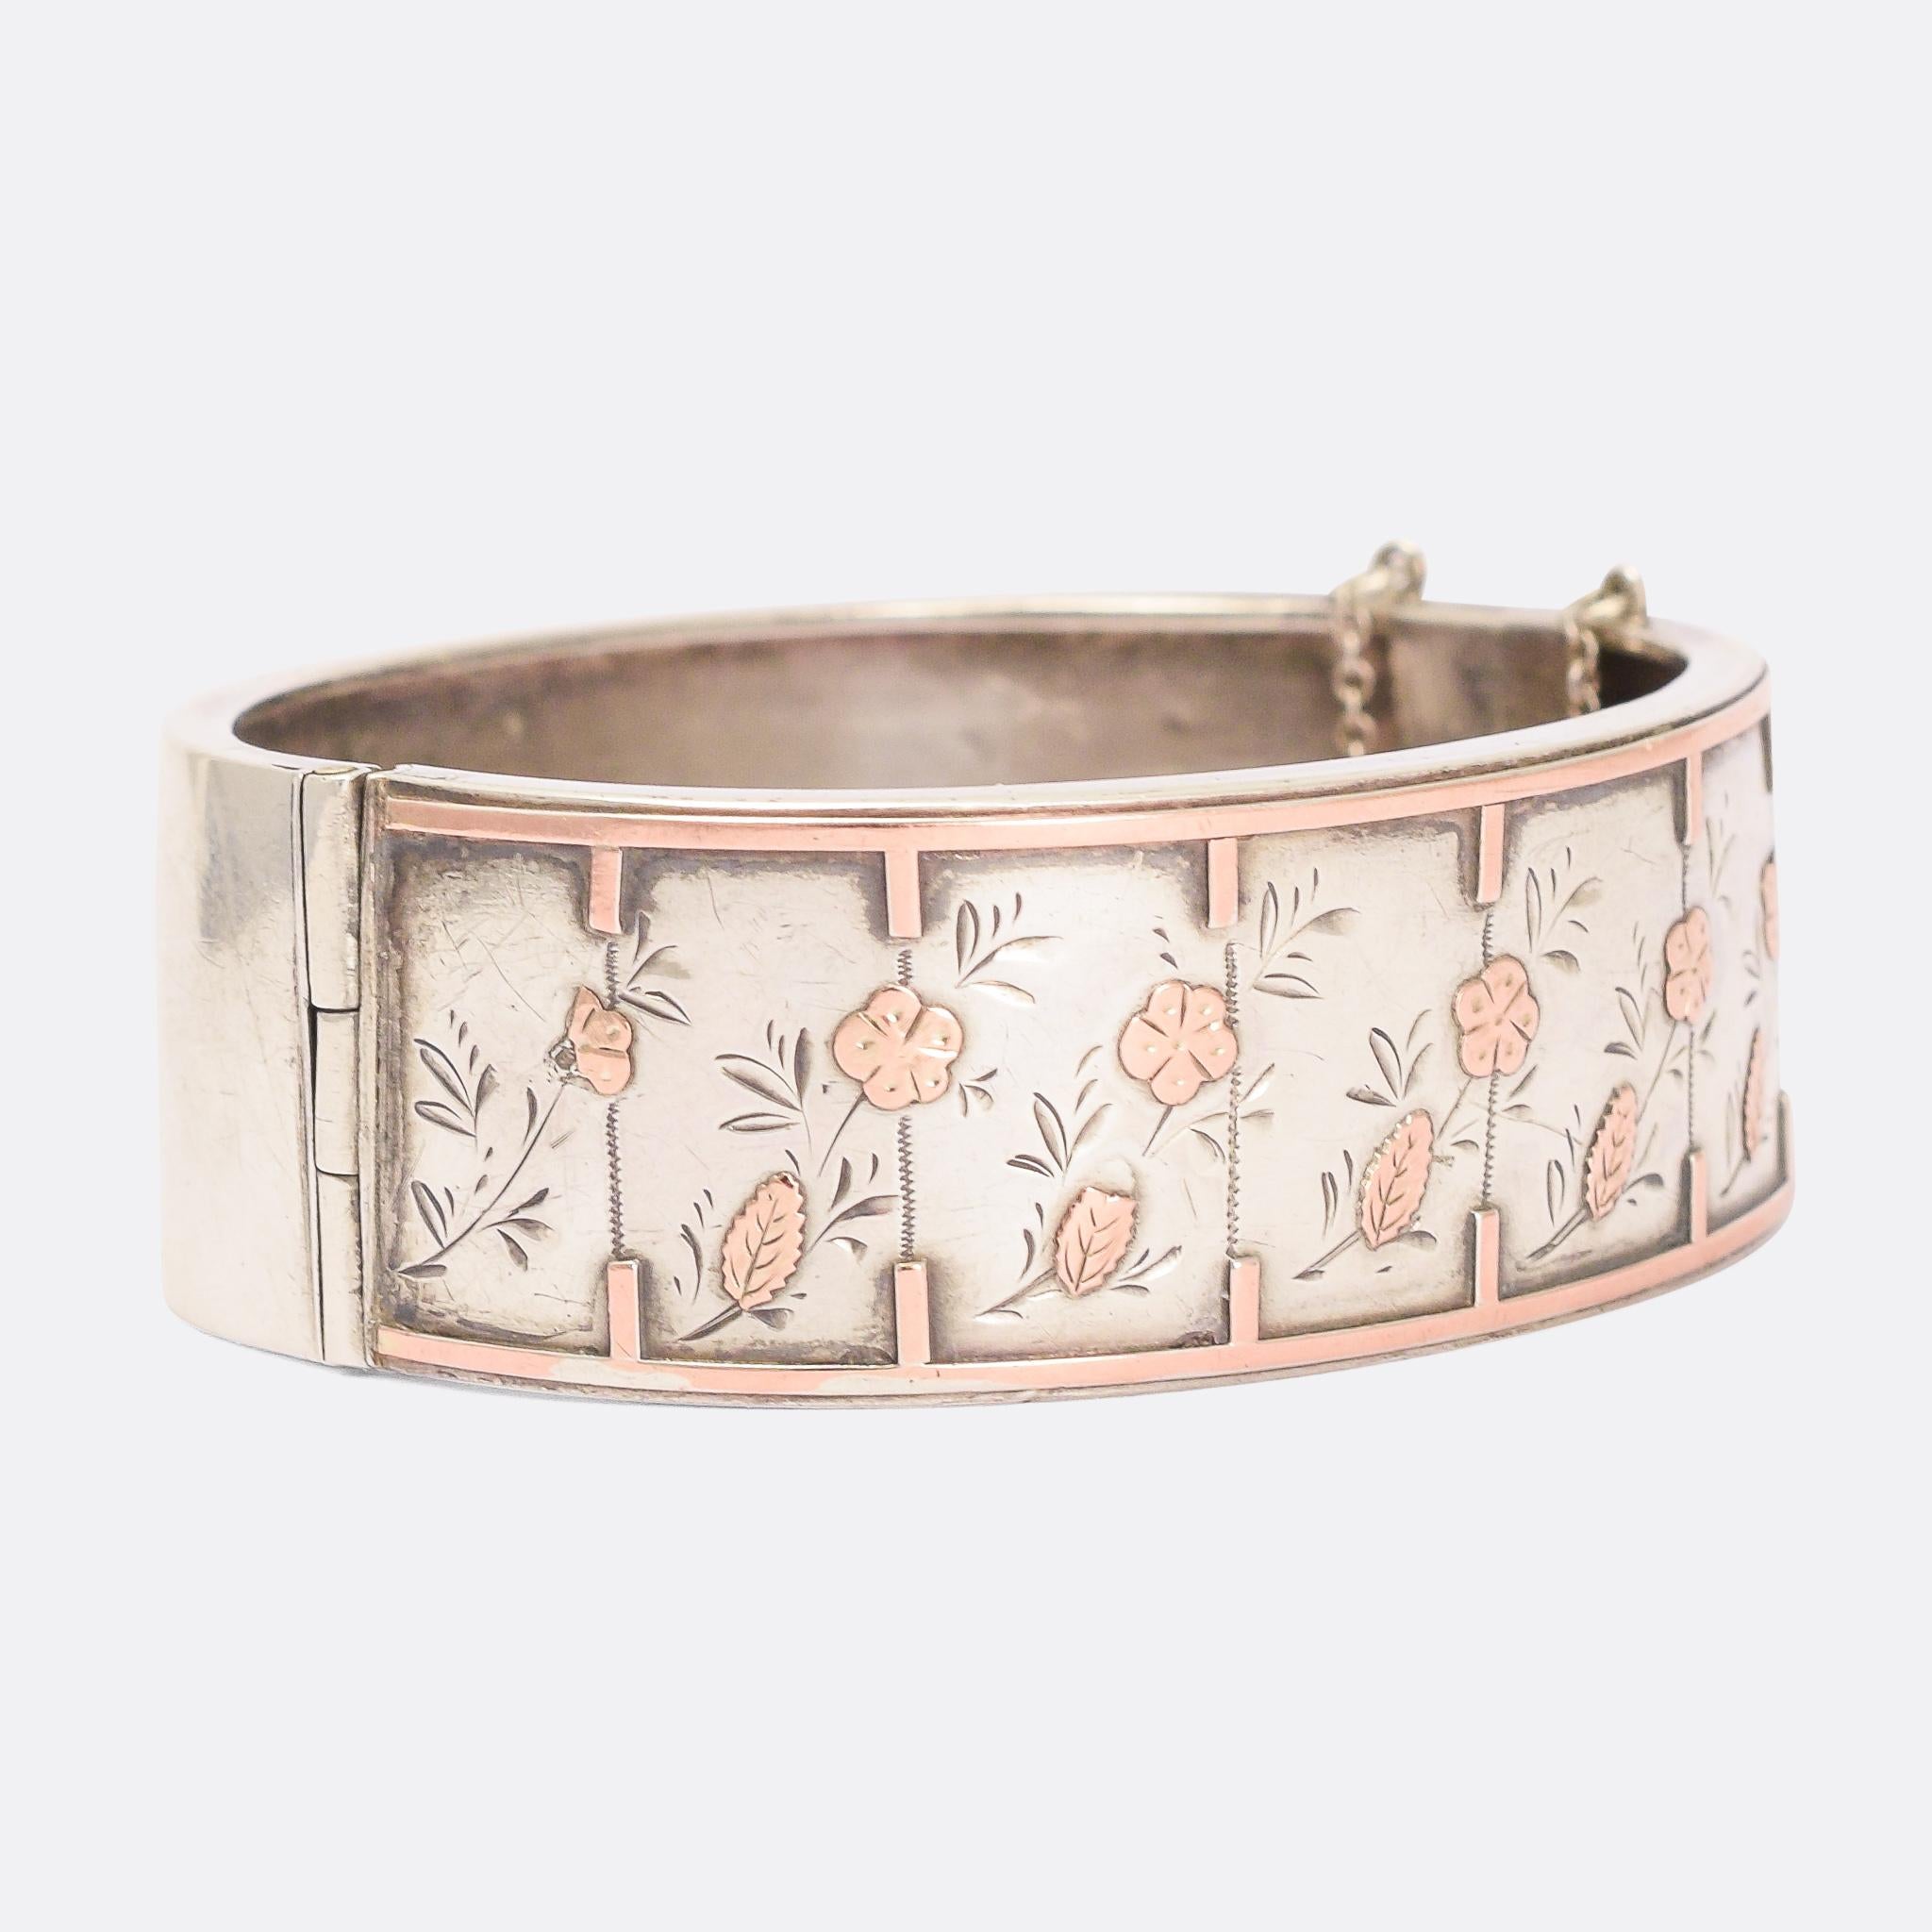 A particularly lovely antique silver cuff bangle. It features applied rose gold flowers and border with chased embellishment, and dates from the latter half of the 19th Century. It has a minimalist look reminiscent of the Aesthetic movement without